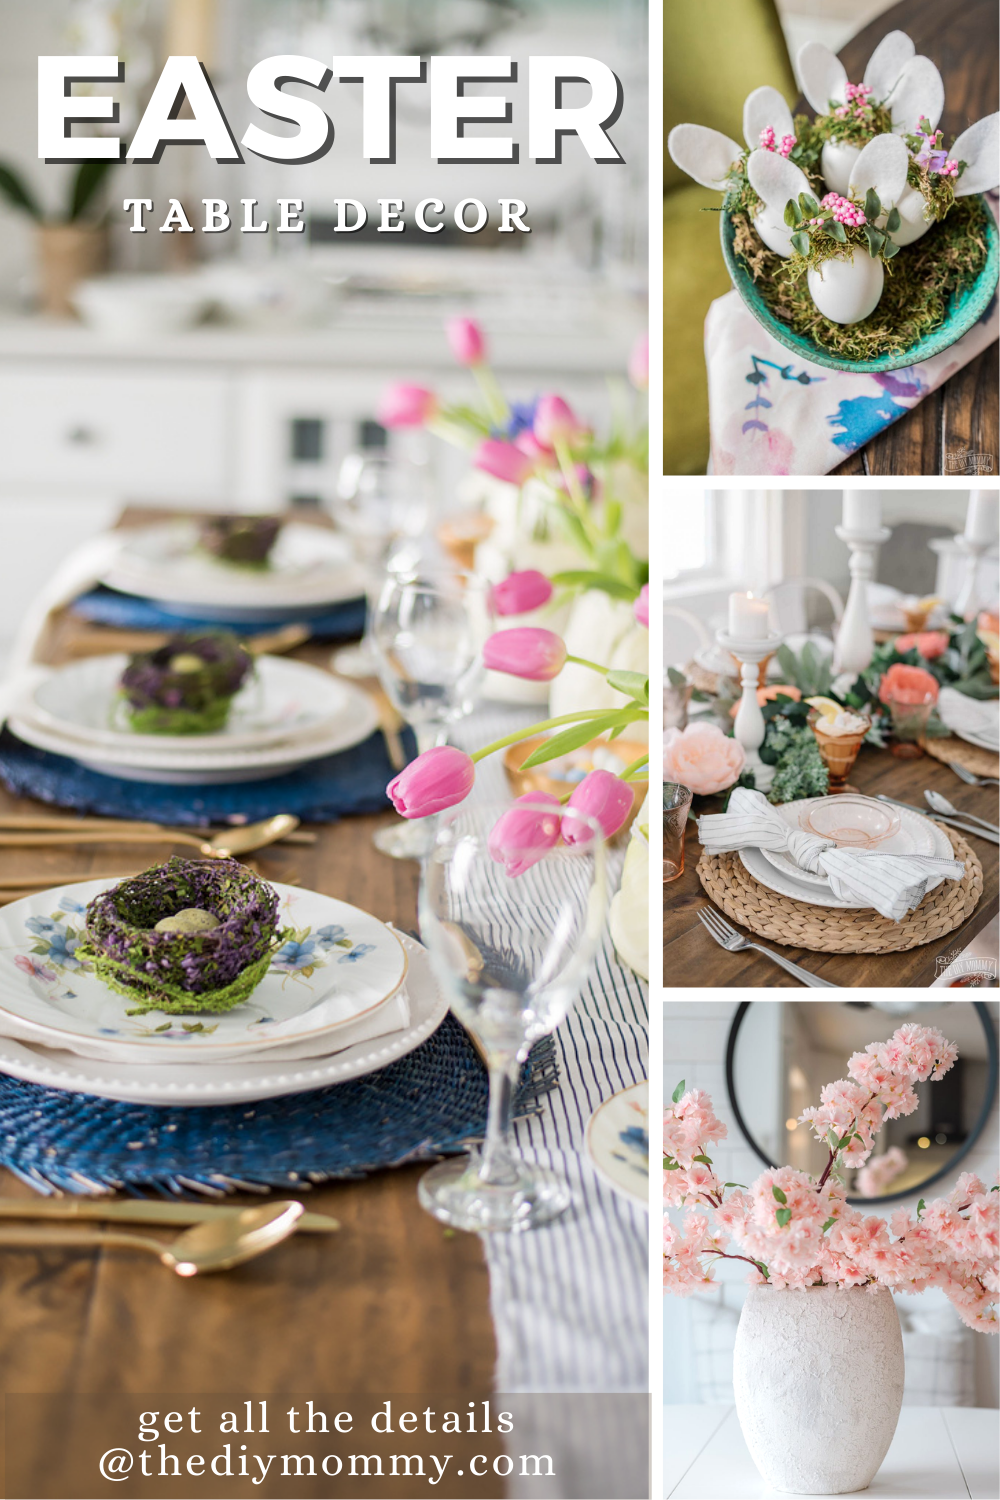 Fresh and Cheerful Easter Table Decor That Won’t Break The Bank